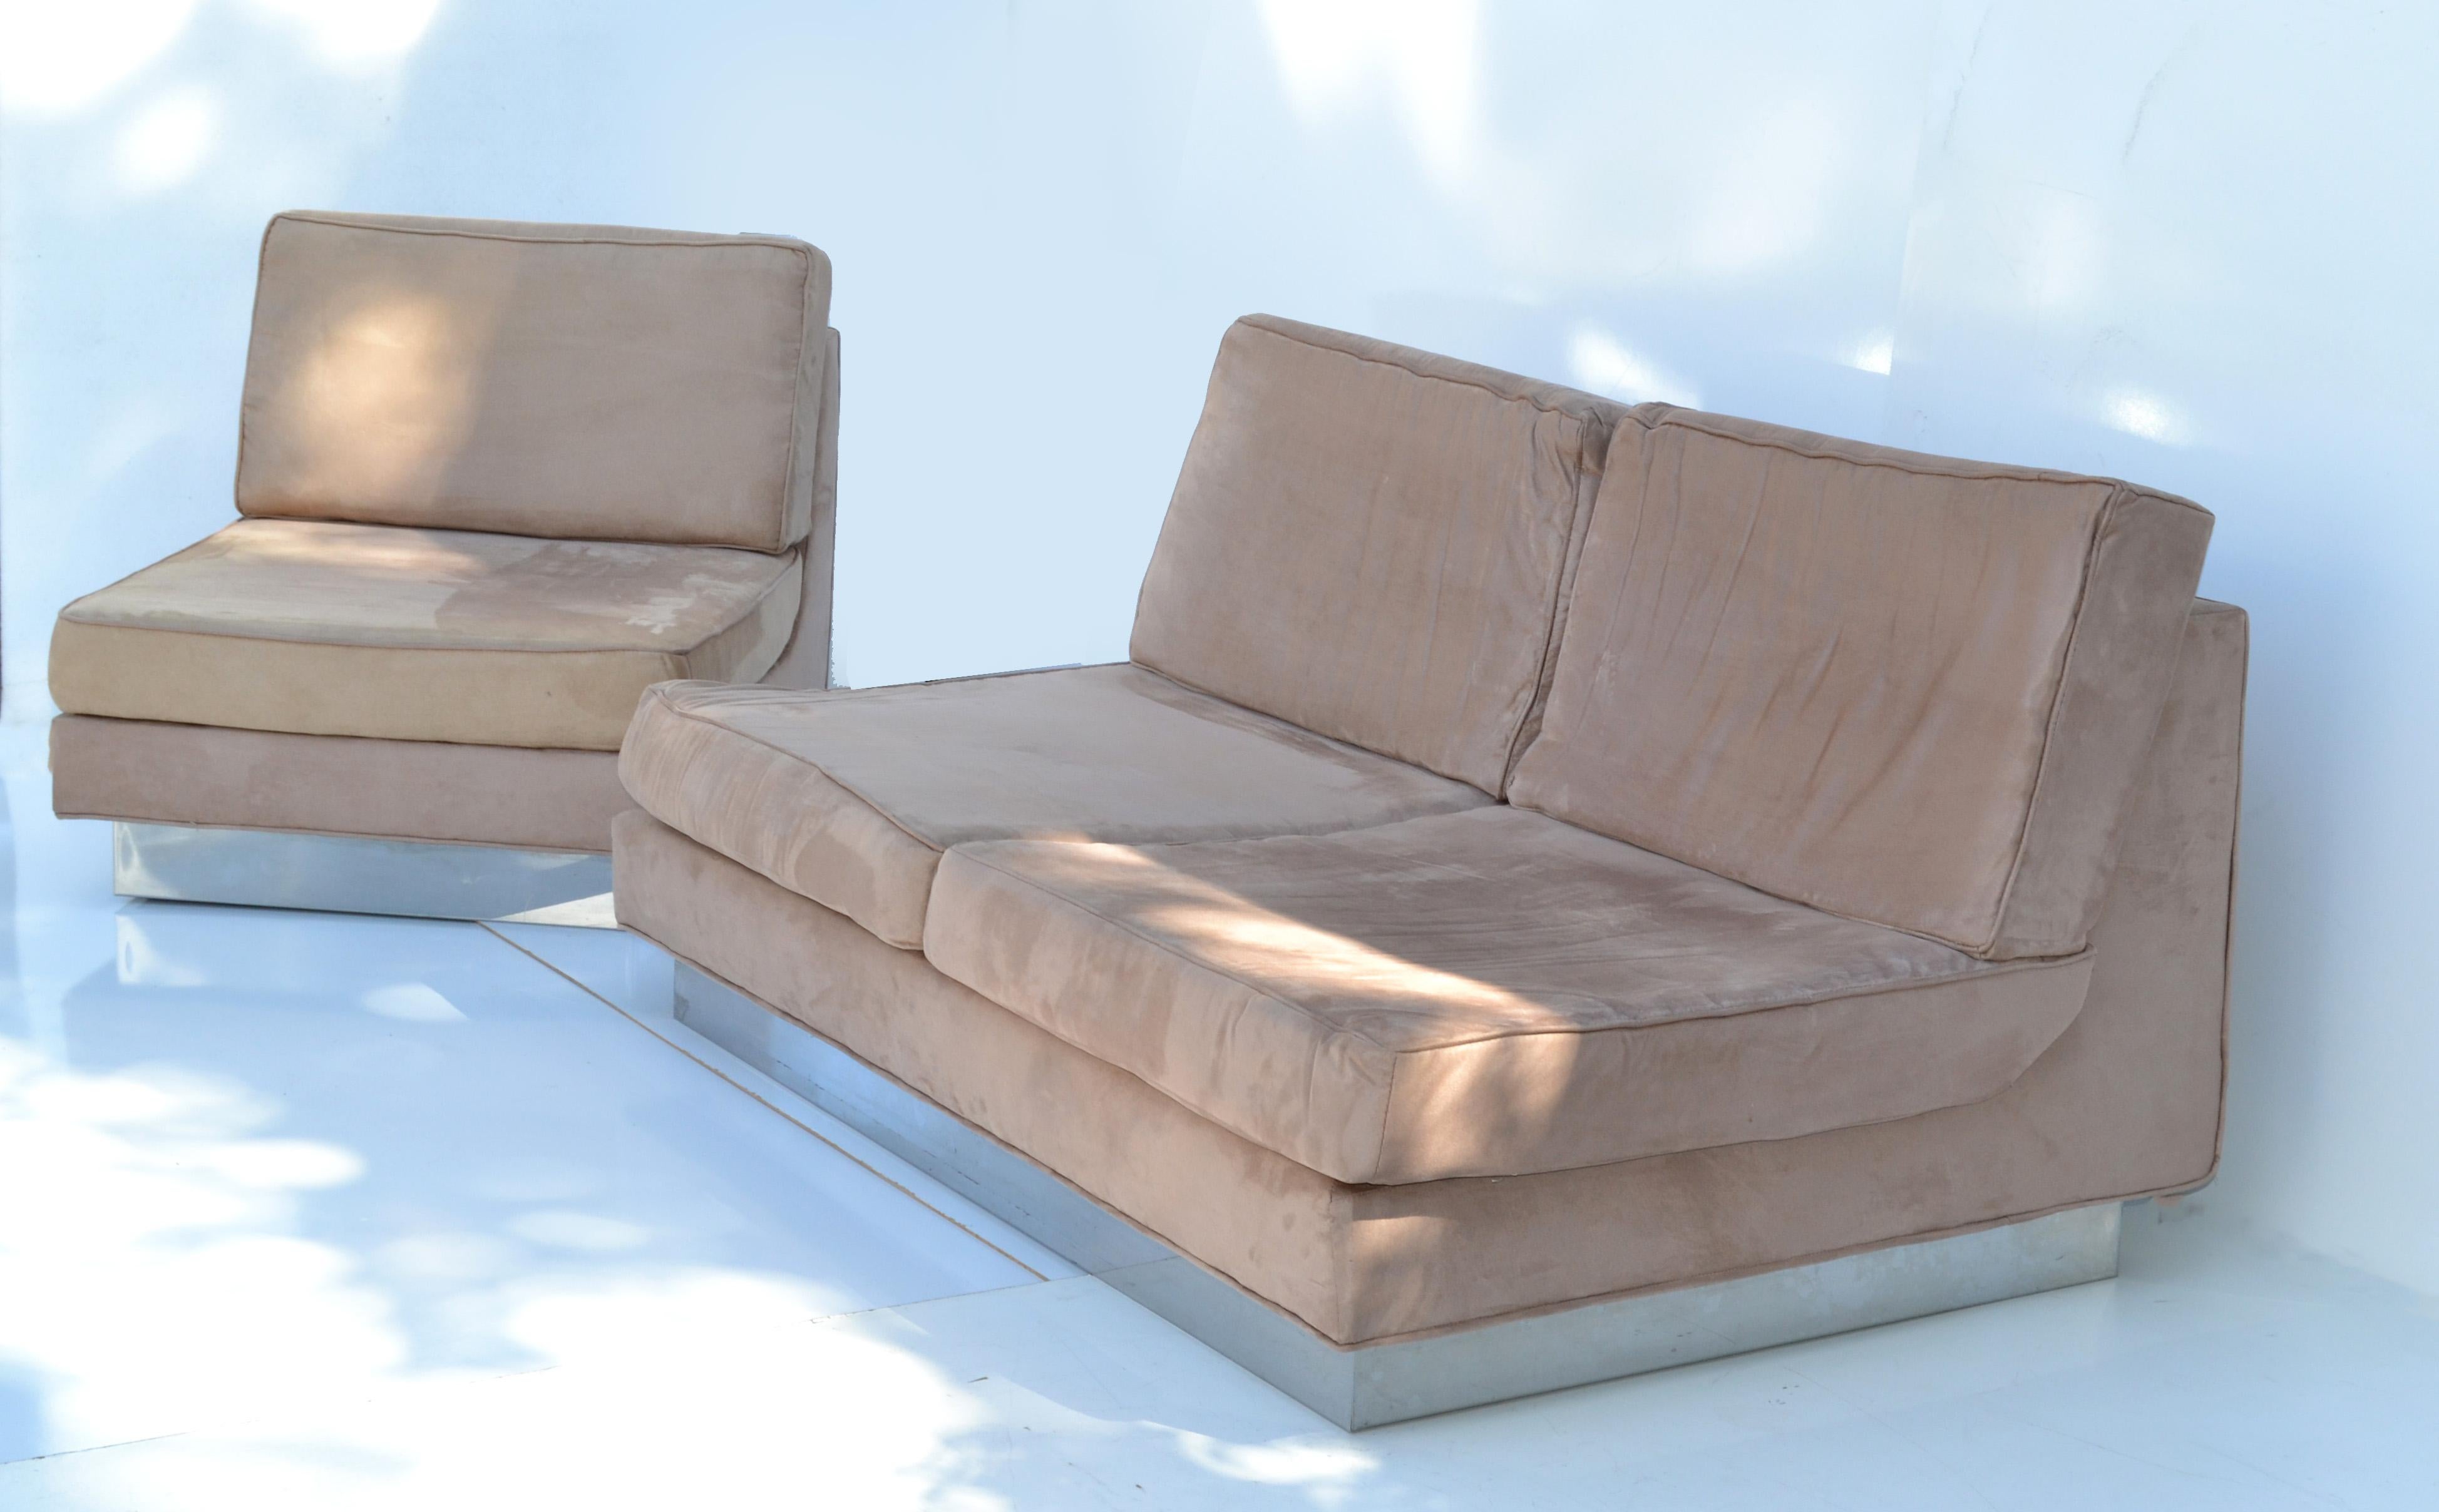 Polished Jacques Charpentier Loveseat & Lounge Chair in Beige Ultrasuede 1970 France For Sale